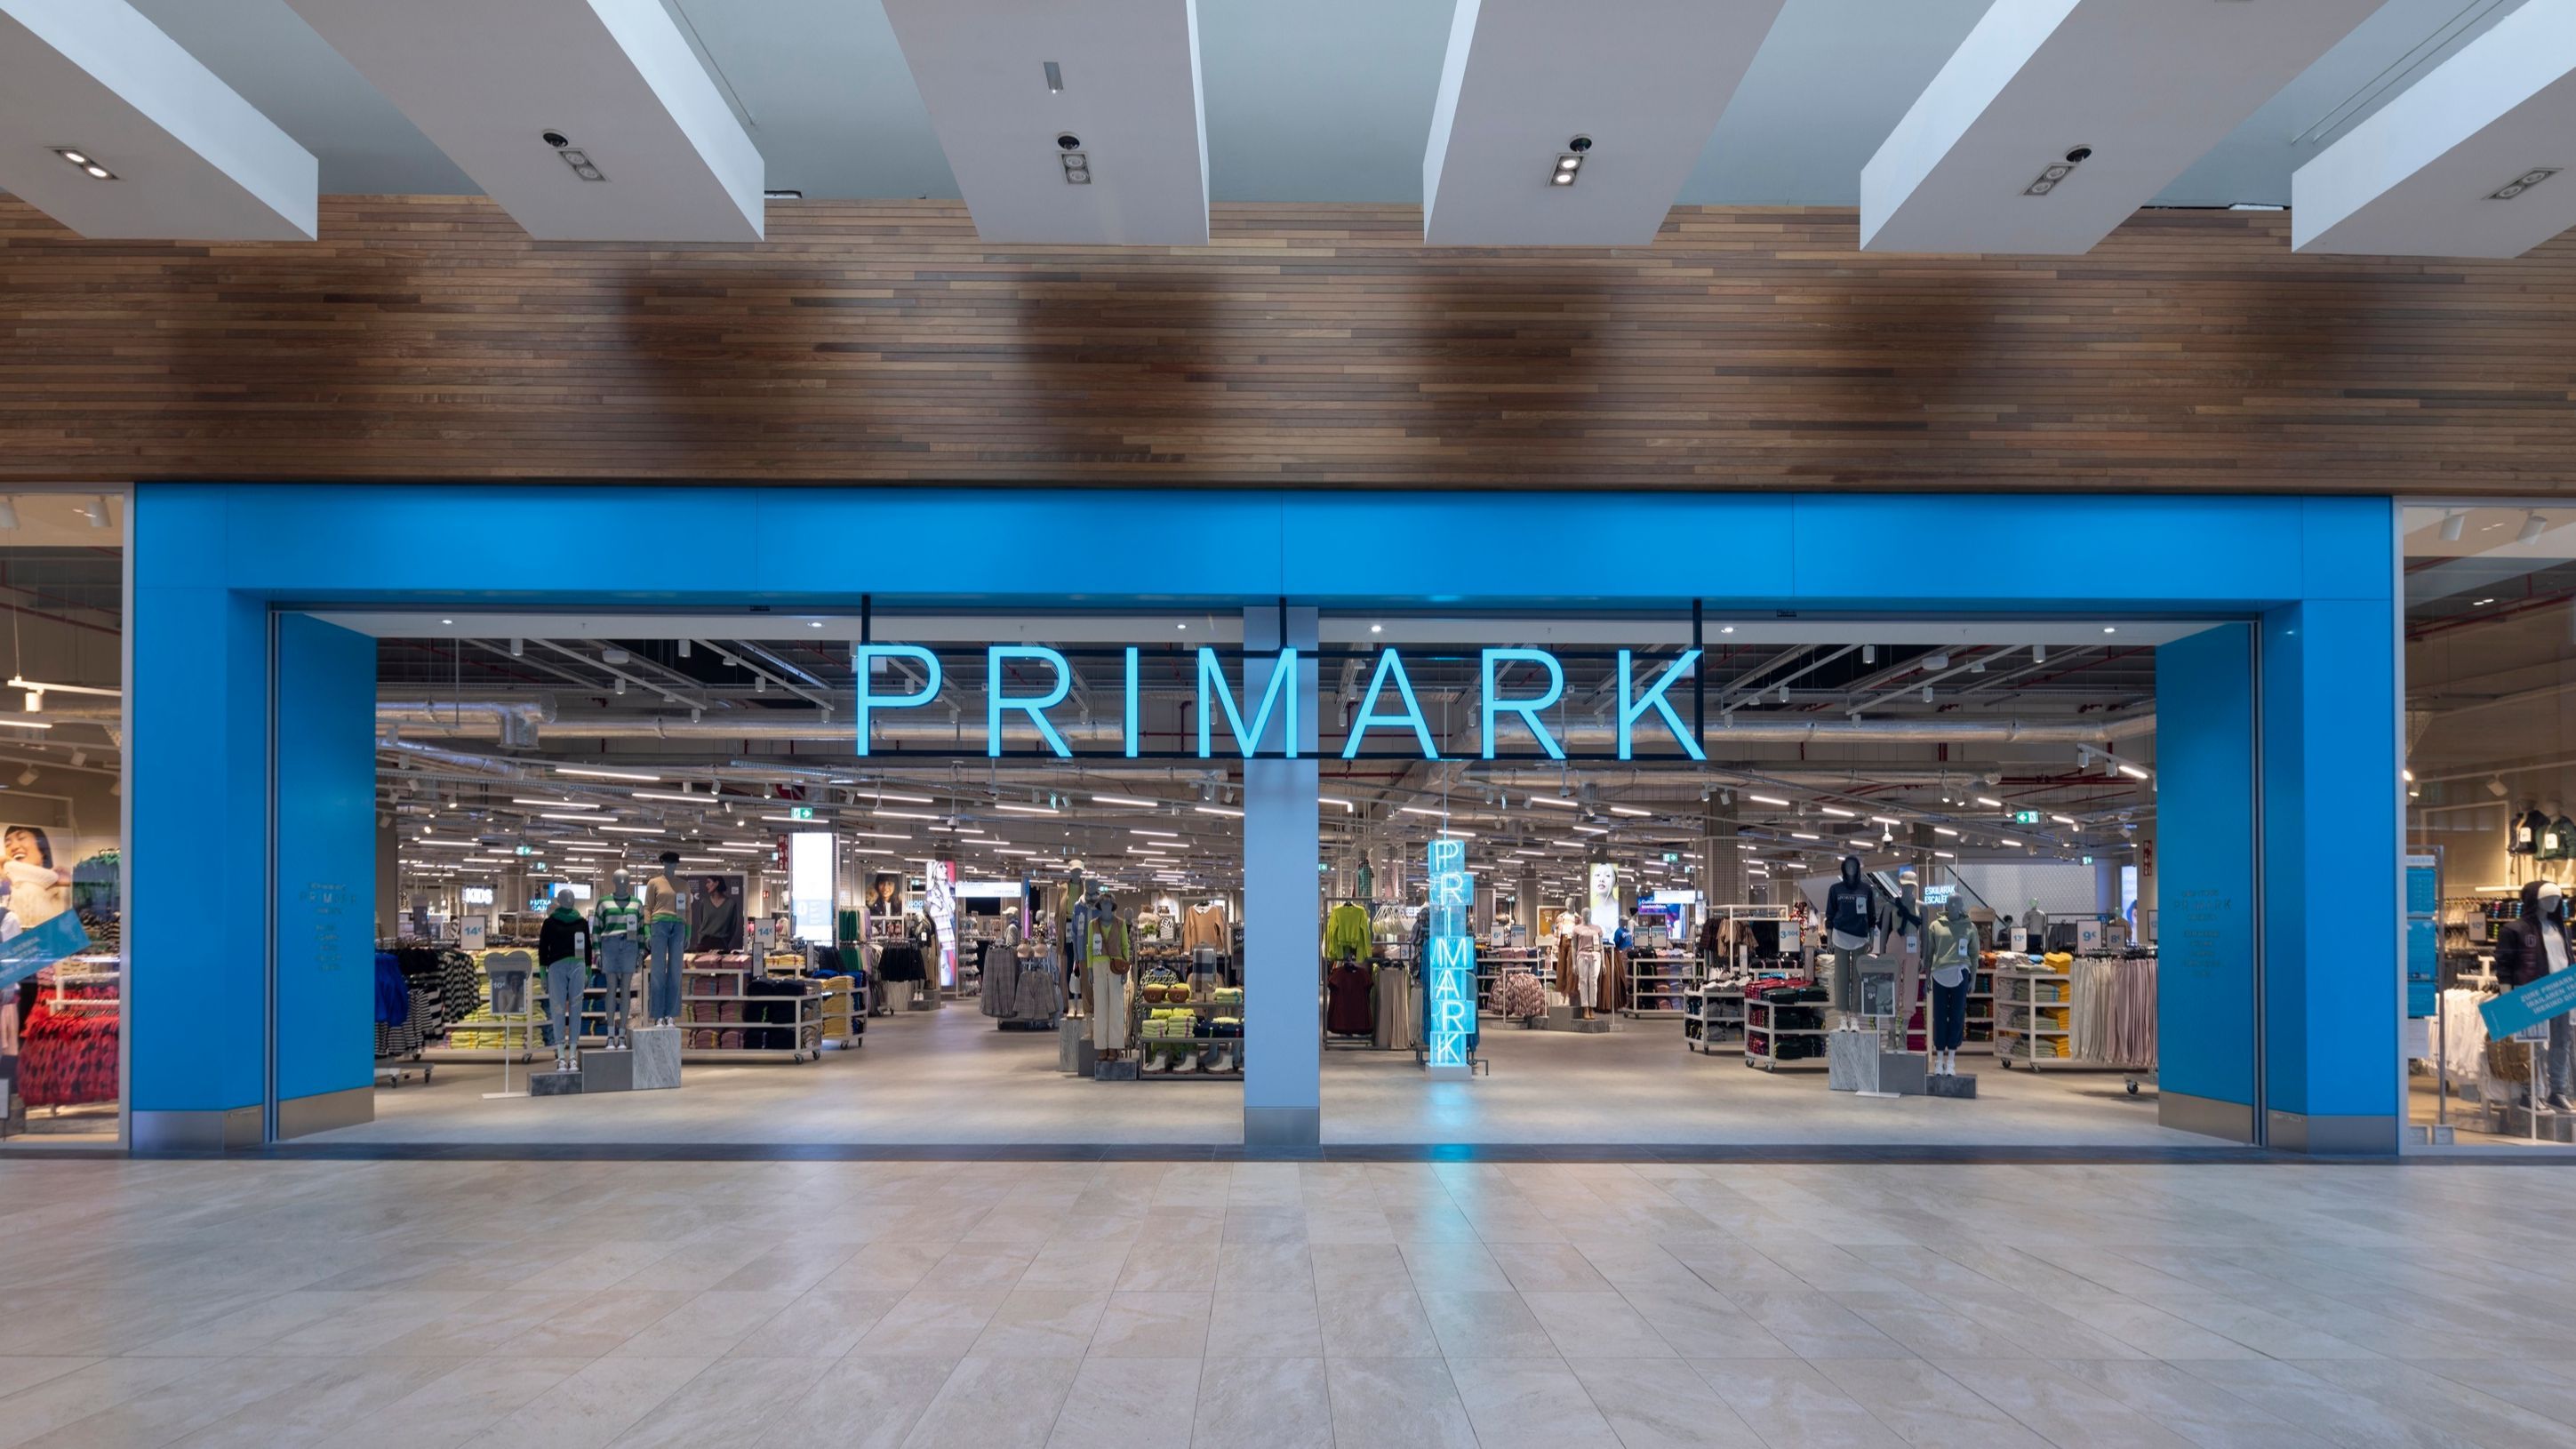 Primark agrees to a wage enhance of between 19% and 23% within the subsequent three years